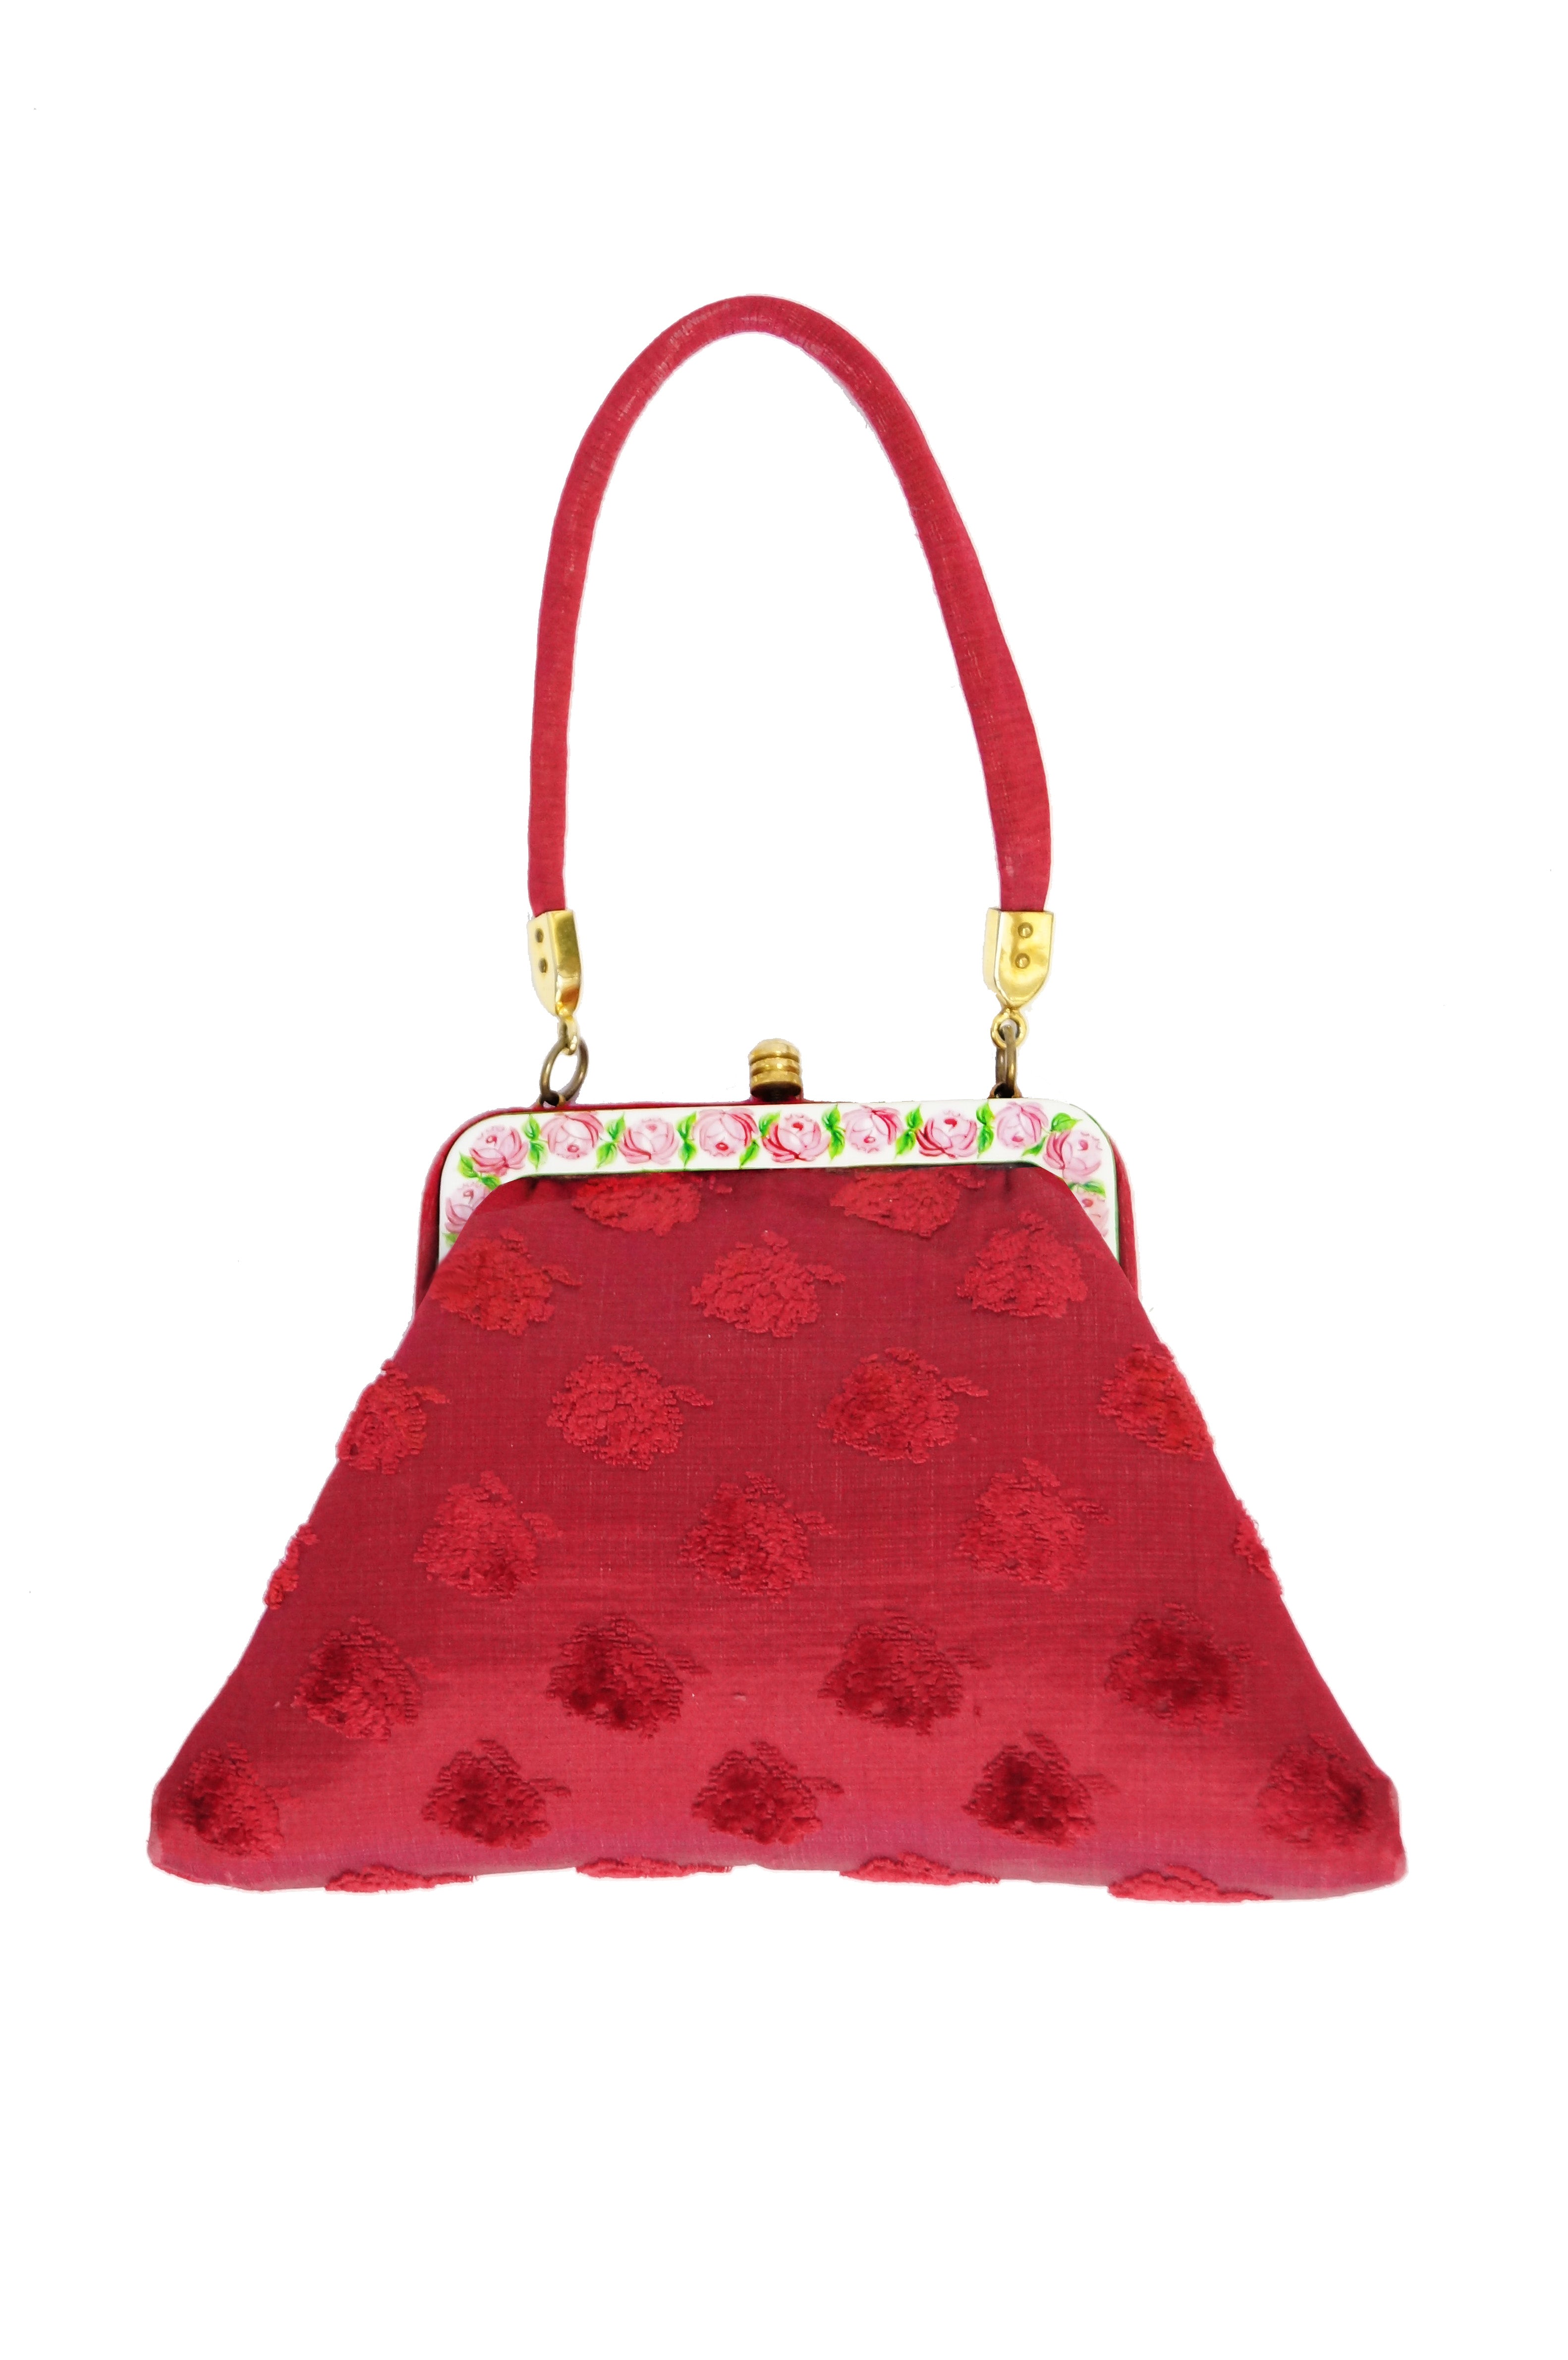 The Diva! Red, Black and 'Brillant' by Delvaux – TLmagazine